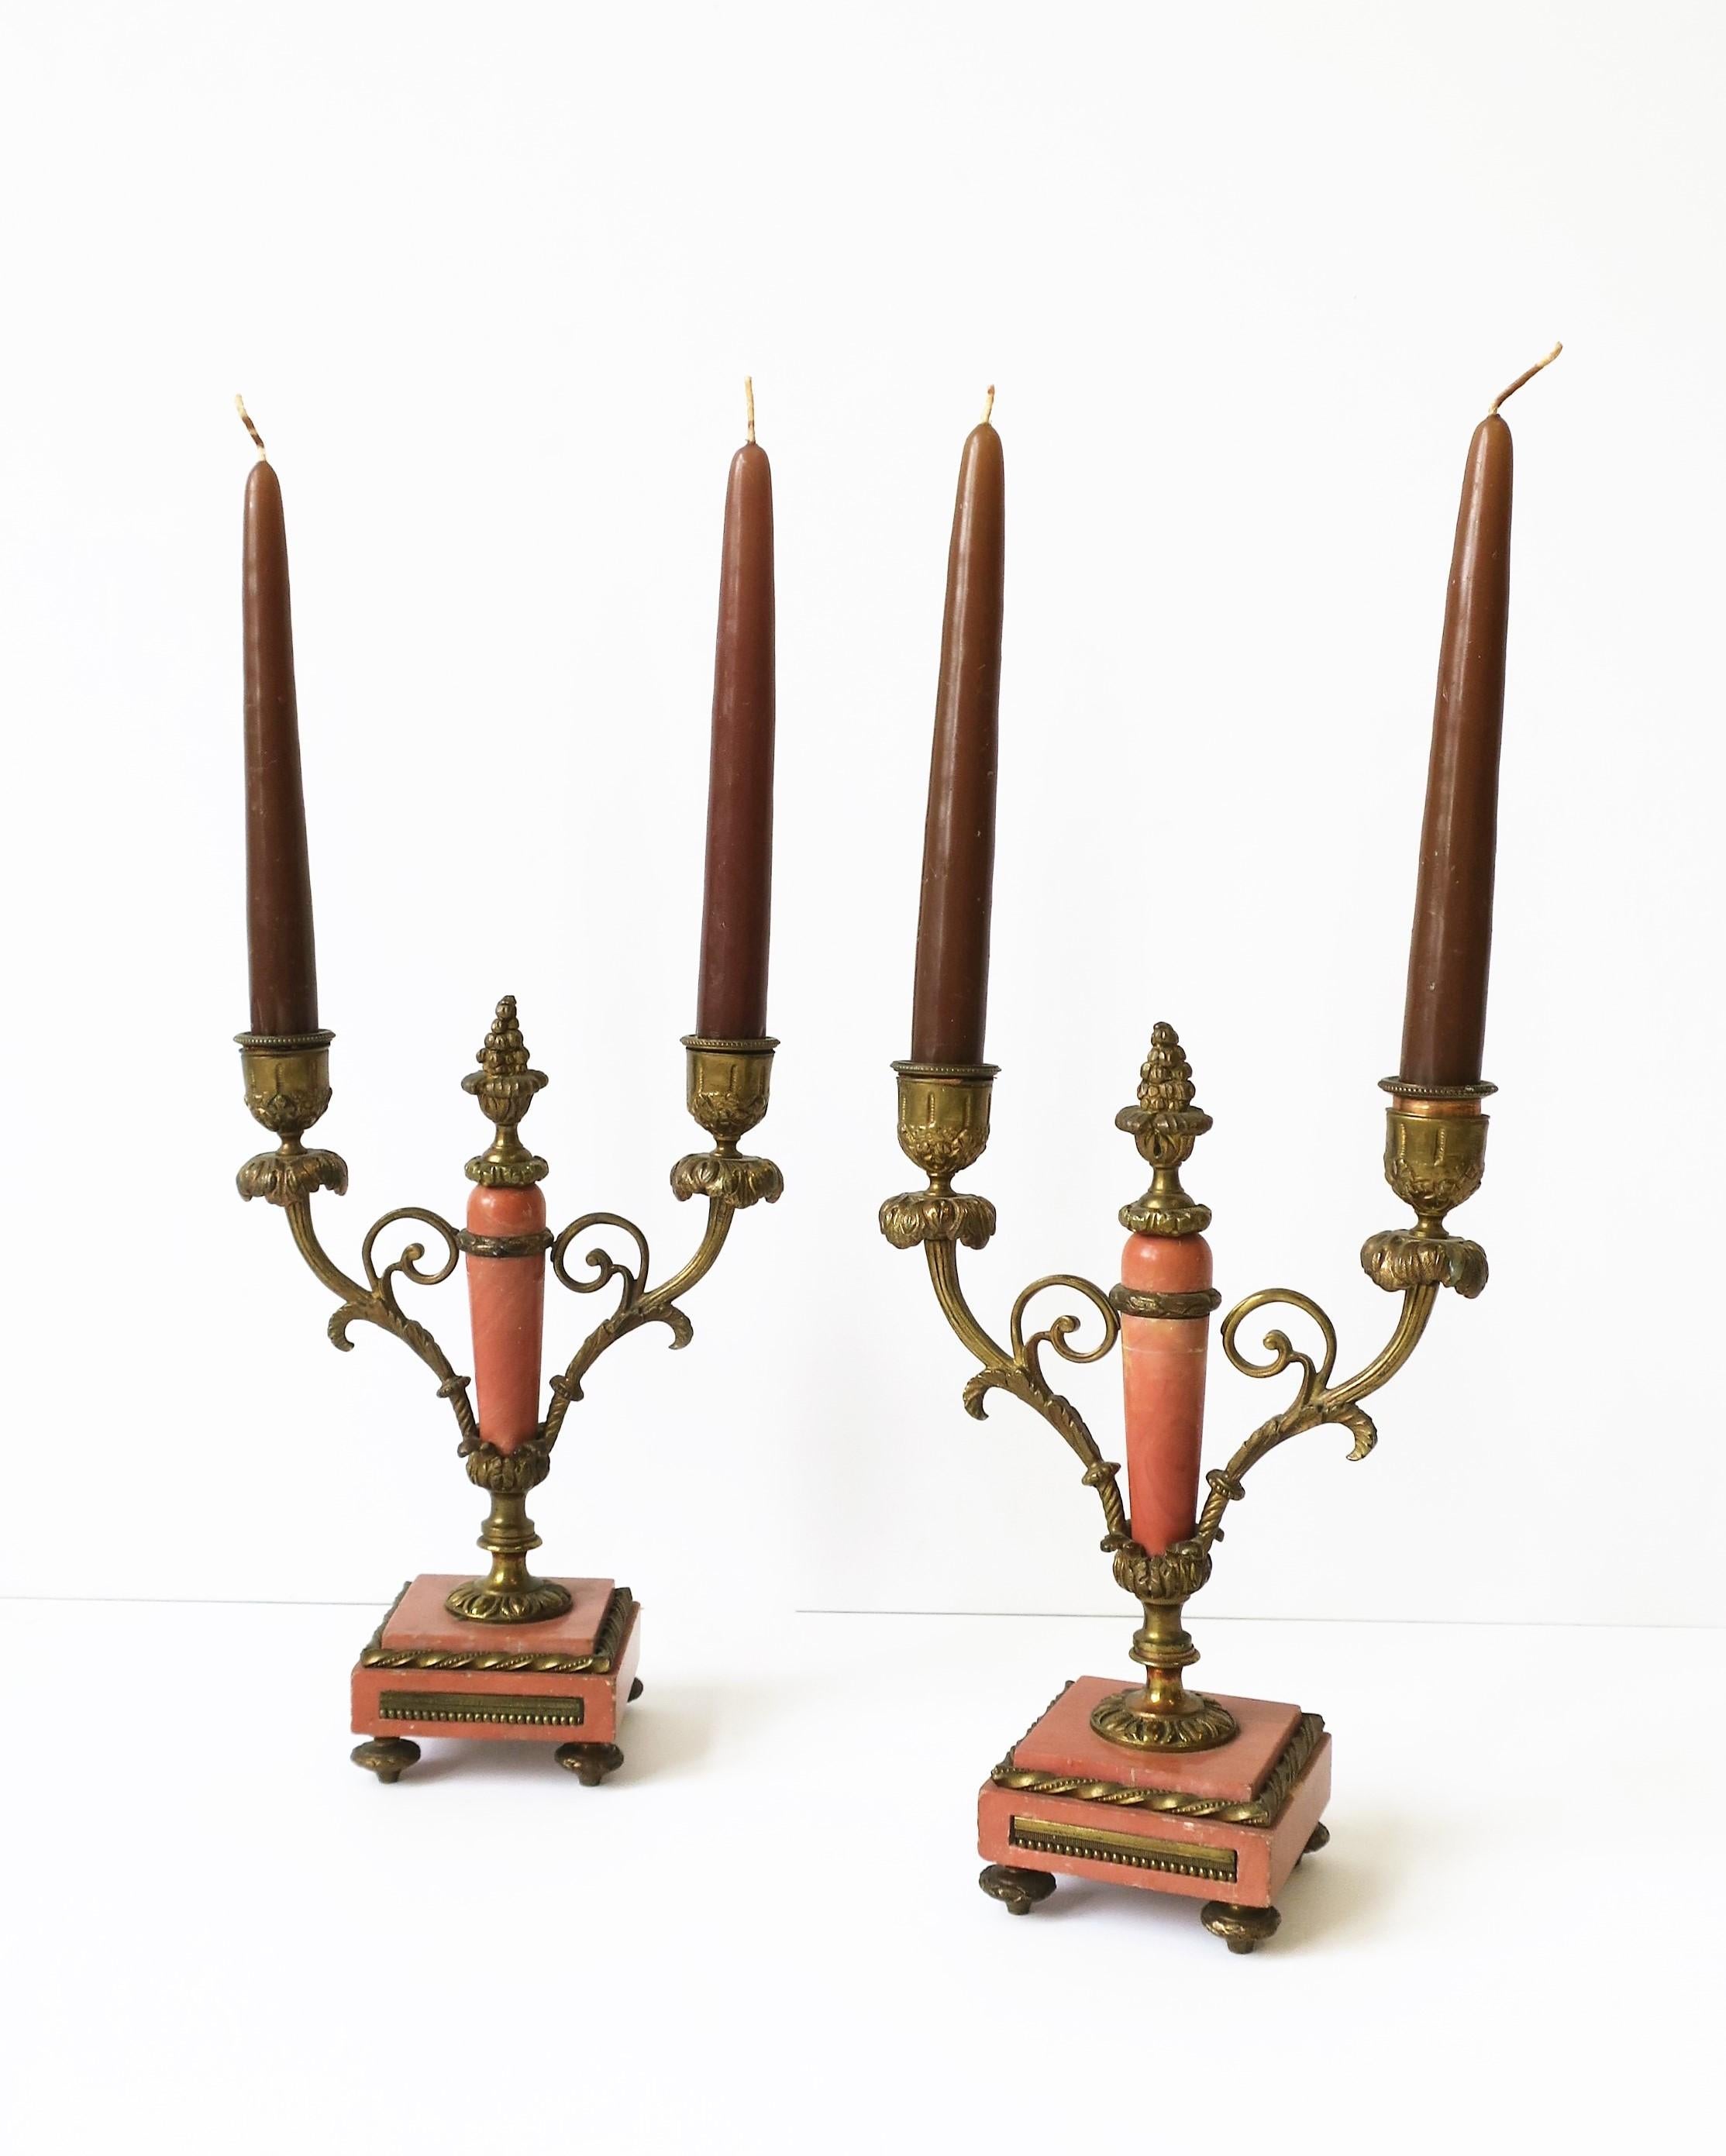 A beautiful pair of antique French salmon coral hue marble and gold brass ormolu candlestick or candelabra holders in the Louis XVI style, circa late-19th century, France. Marble is a salmon/coral hue. Marked 